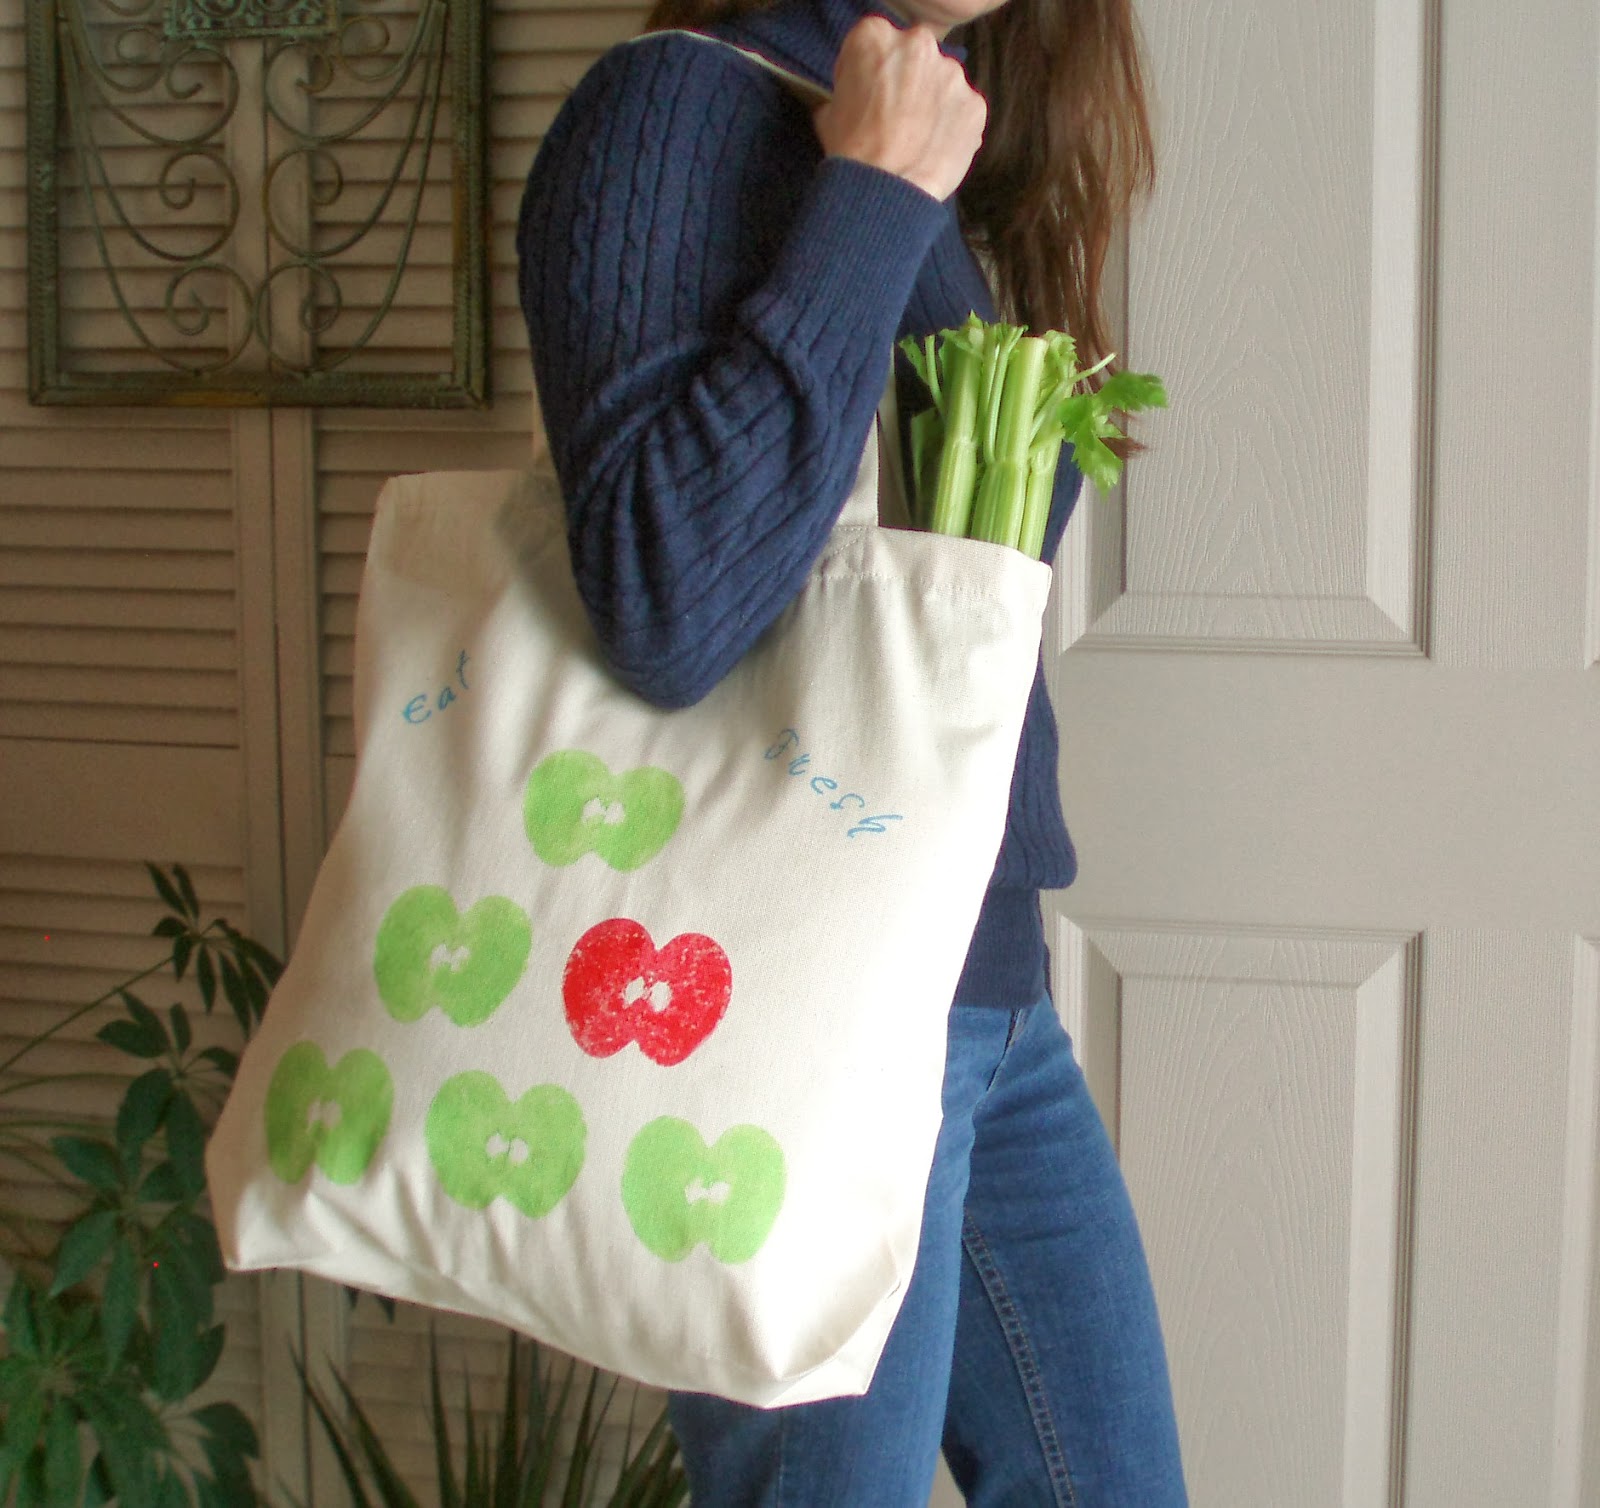 This Mom's Many Hats: Reusable Market Tote